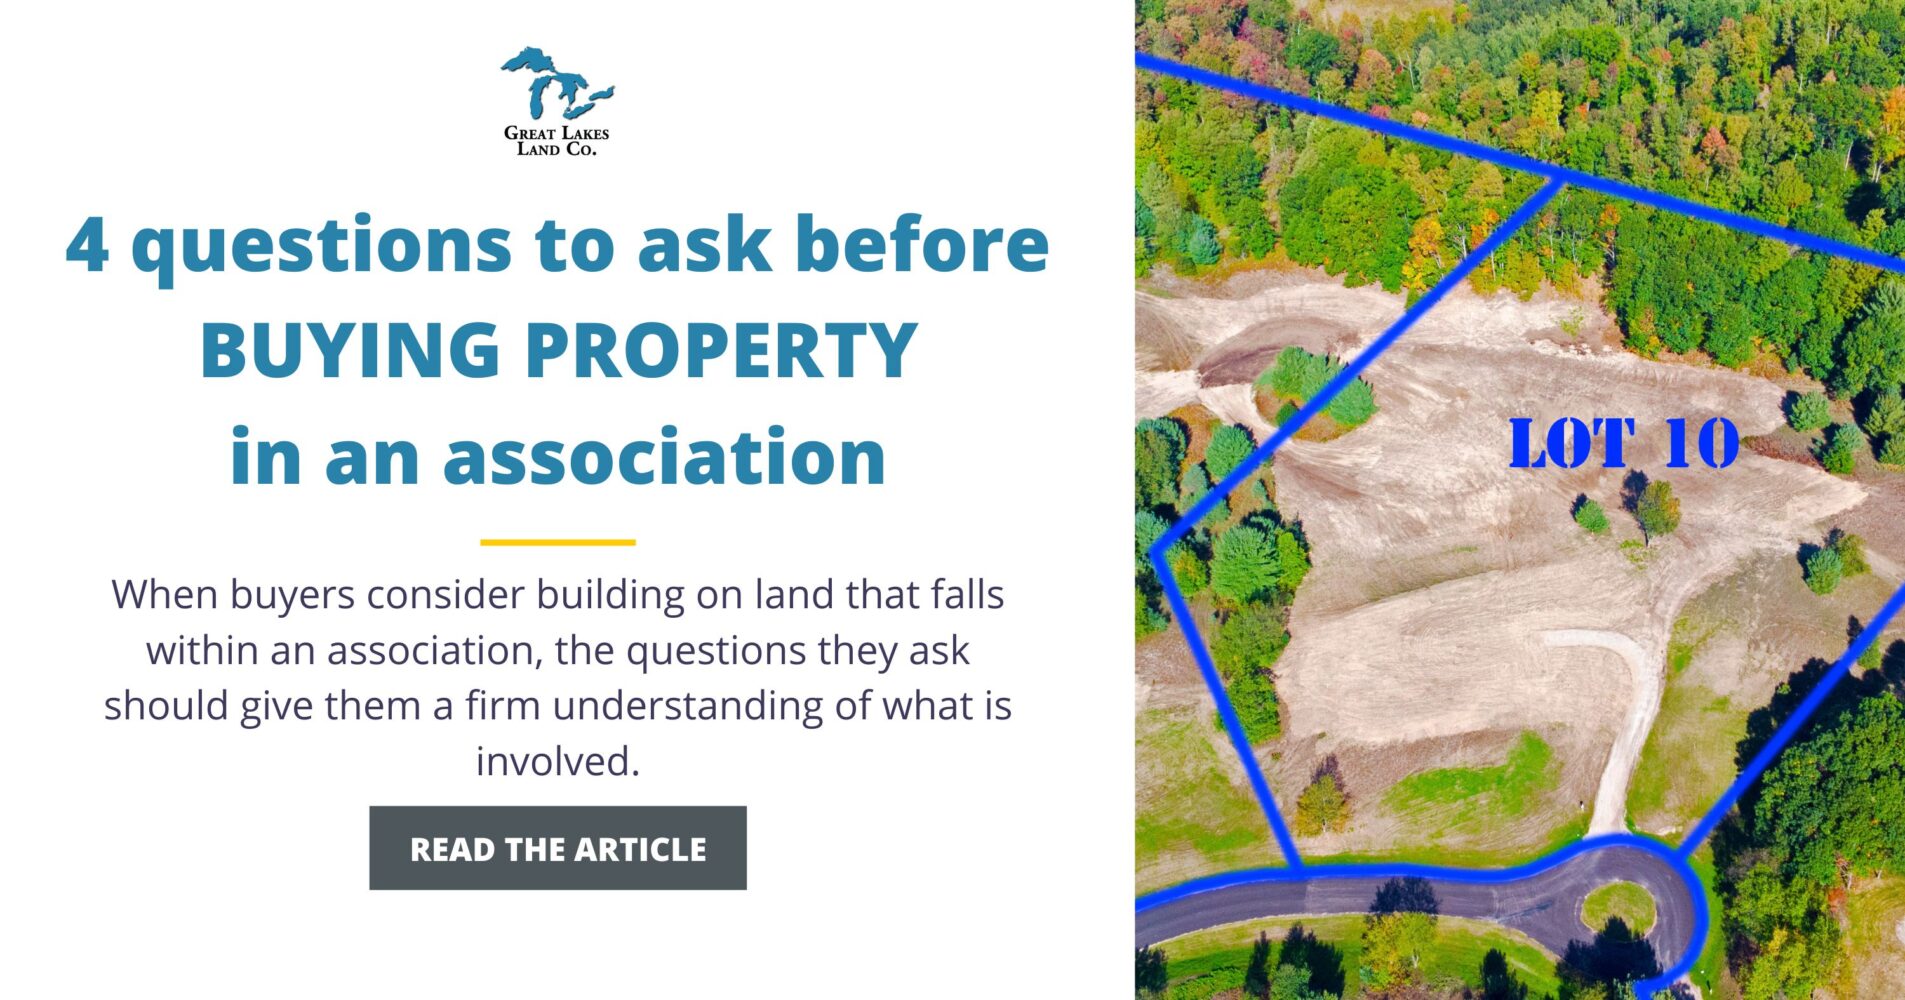 4 questions to ask before buying property in an association